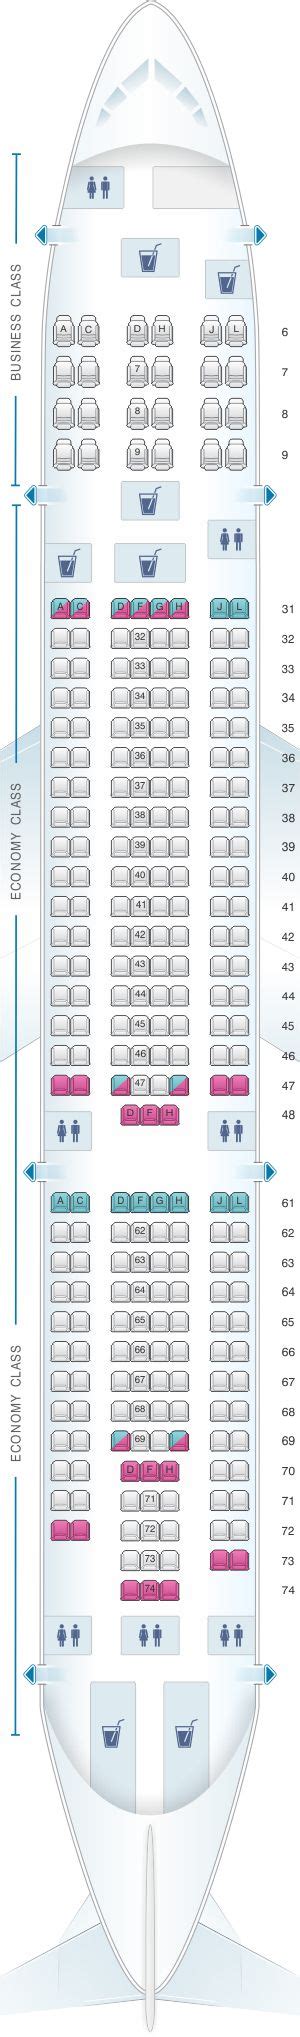 Seat Map China Eastern Airlines Airbus A330 200 Config1 Jetstar